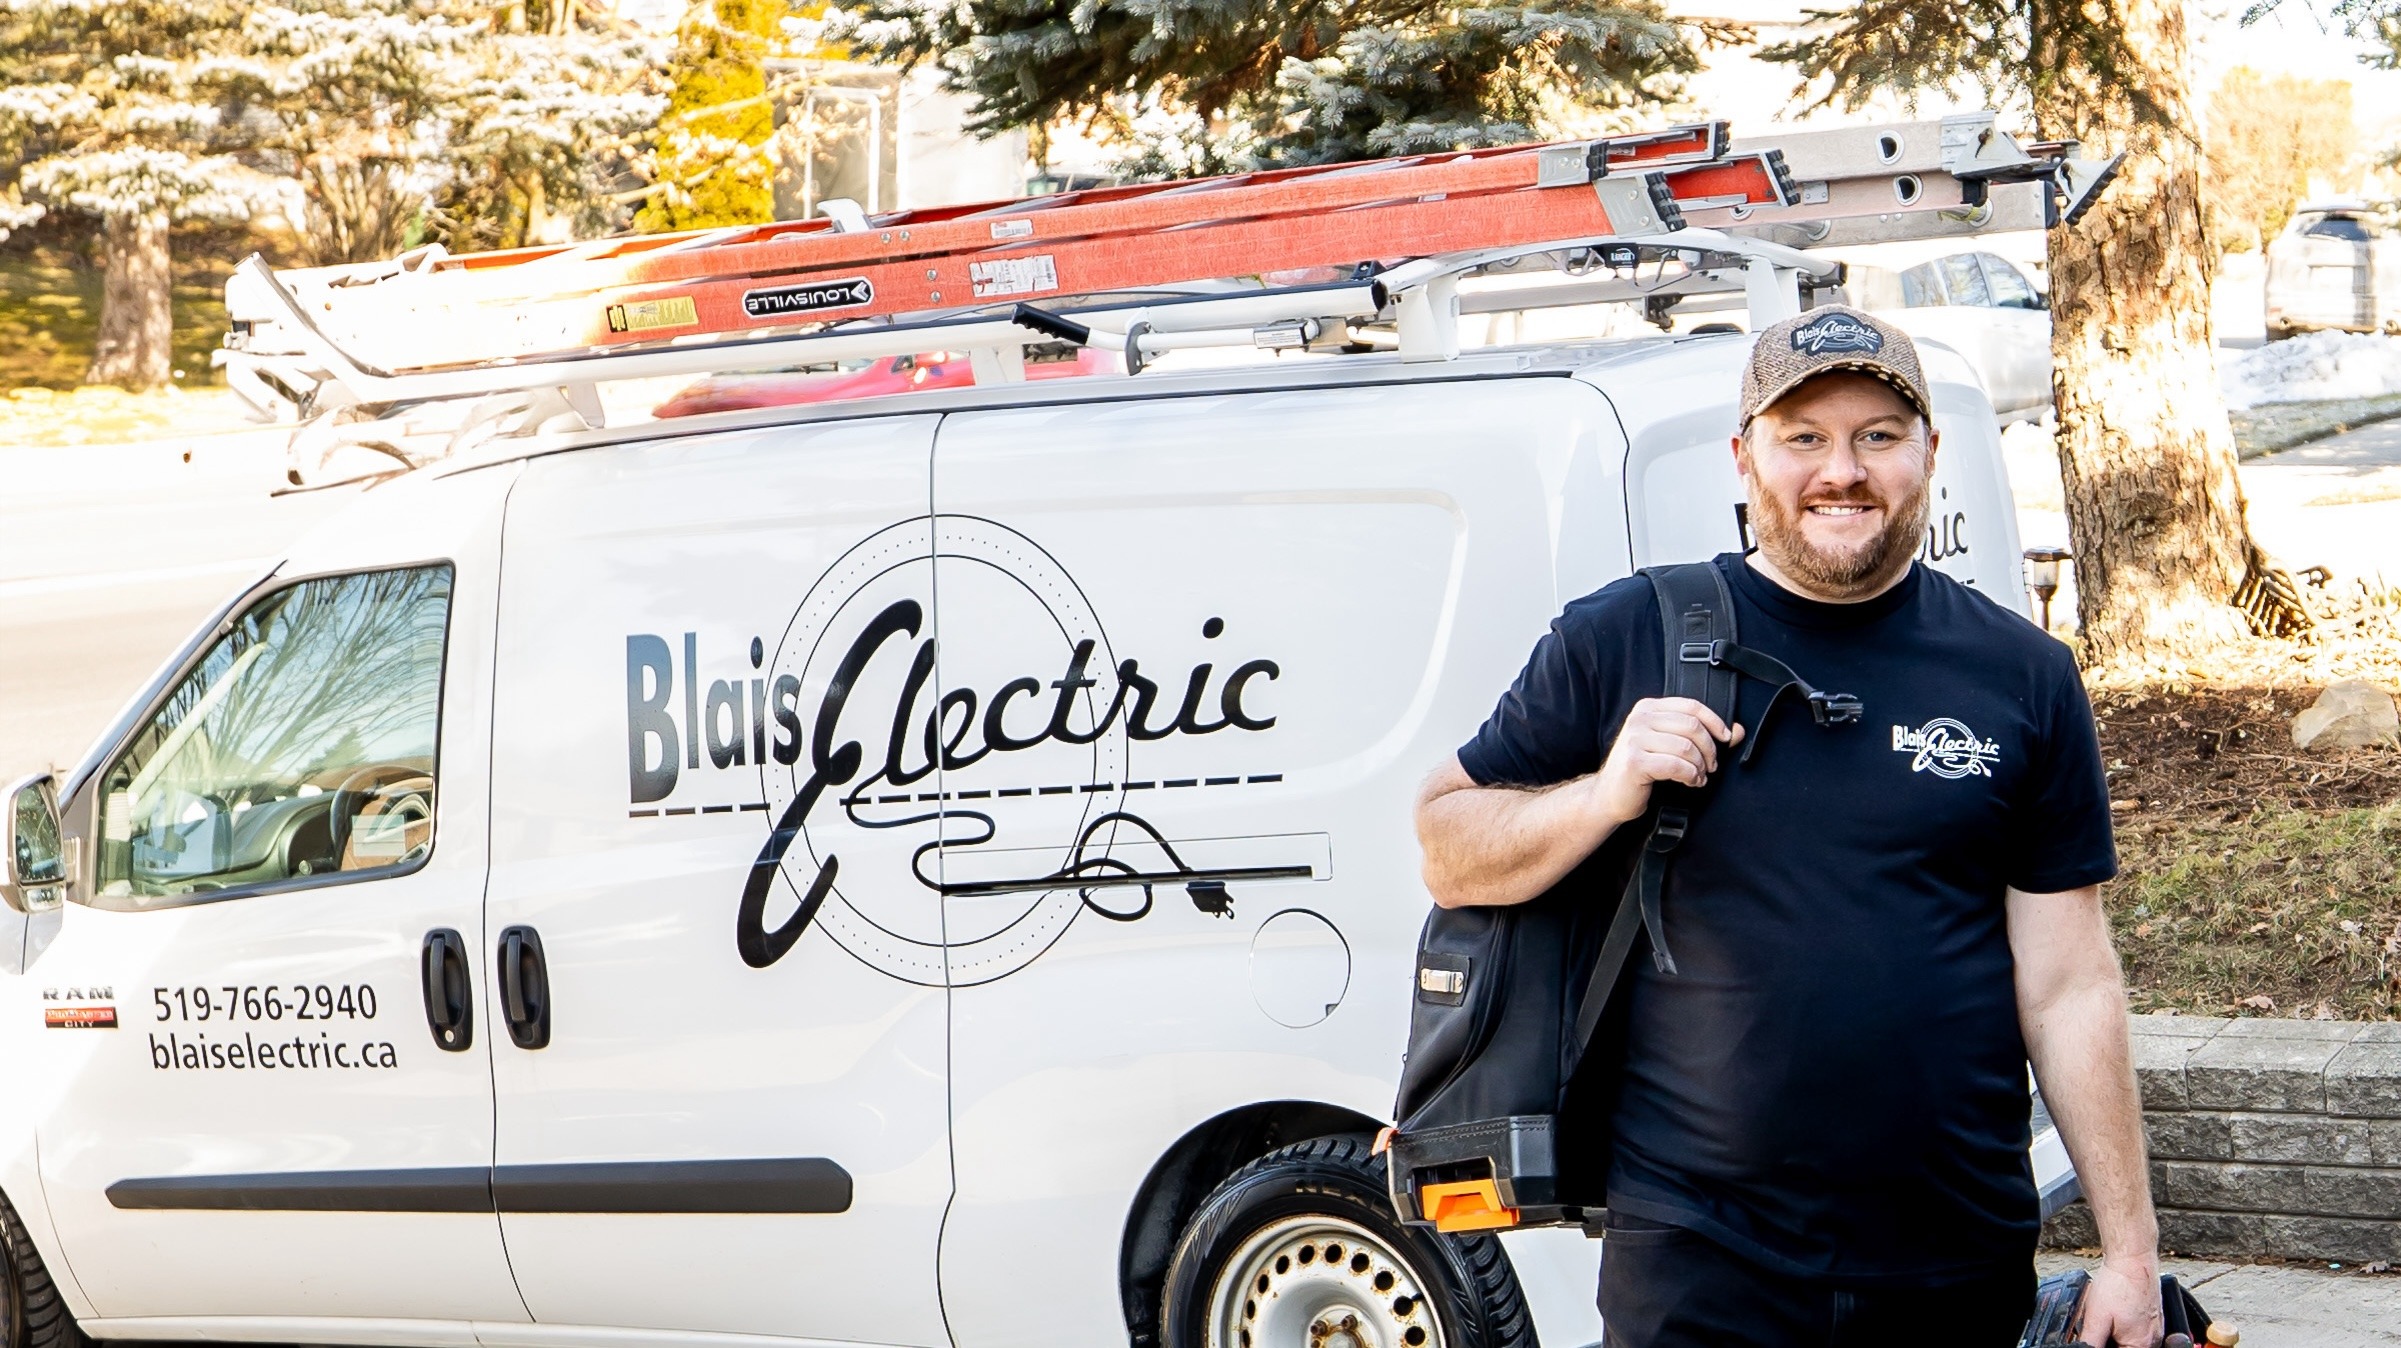 A smiling person stands beside a 'Blais Electric' van equipped with ladders, outdoors on a sunny day with trees and snow patches visible.